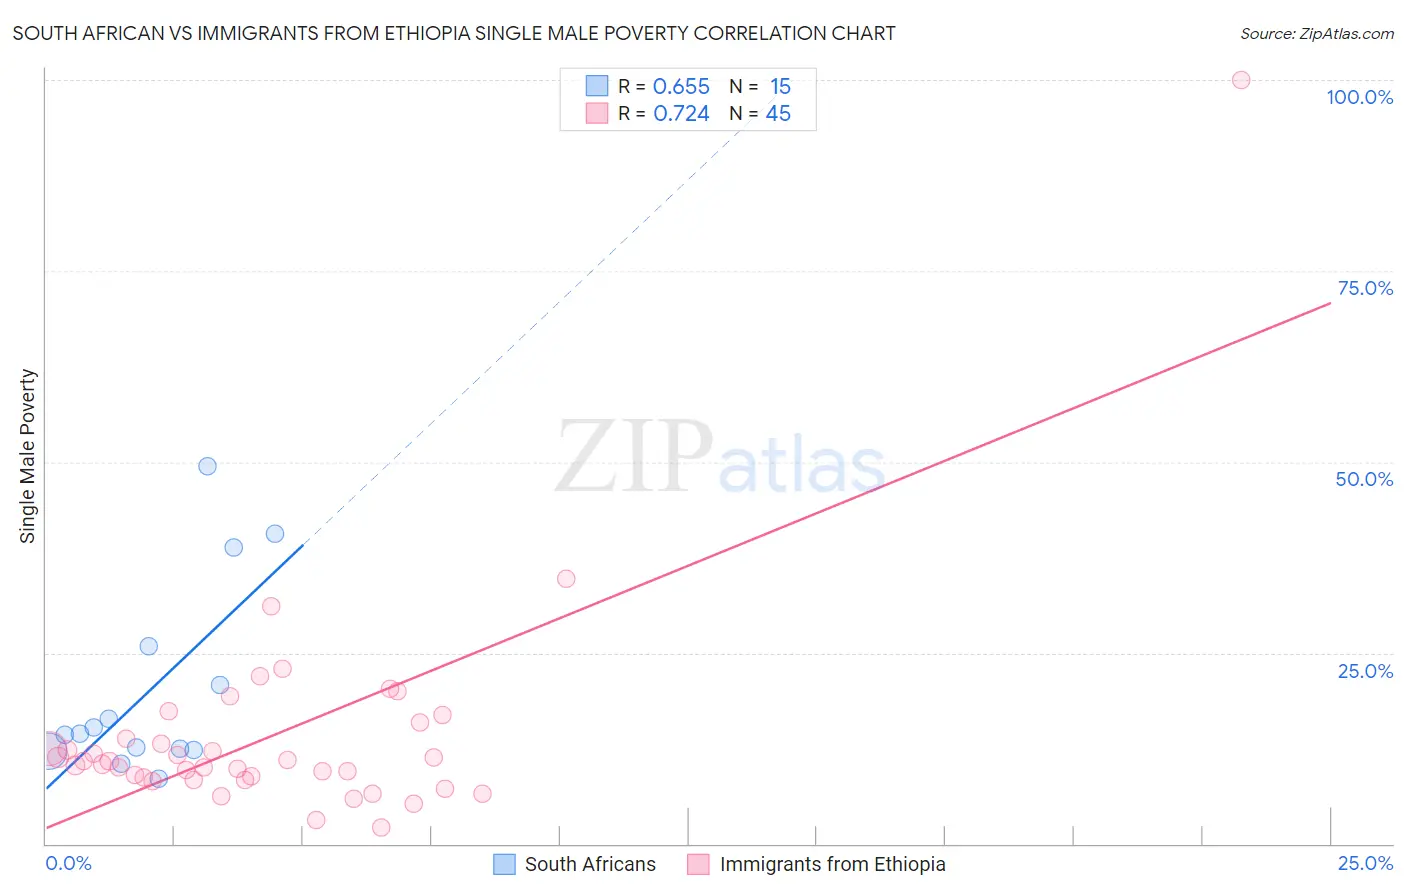 South African vs Immigrants from Ethiopia Single Male Poverty